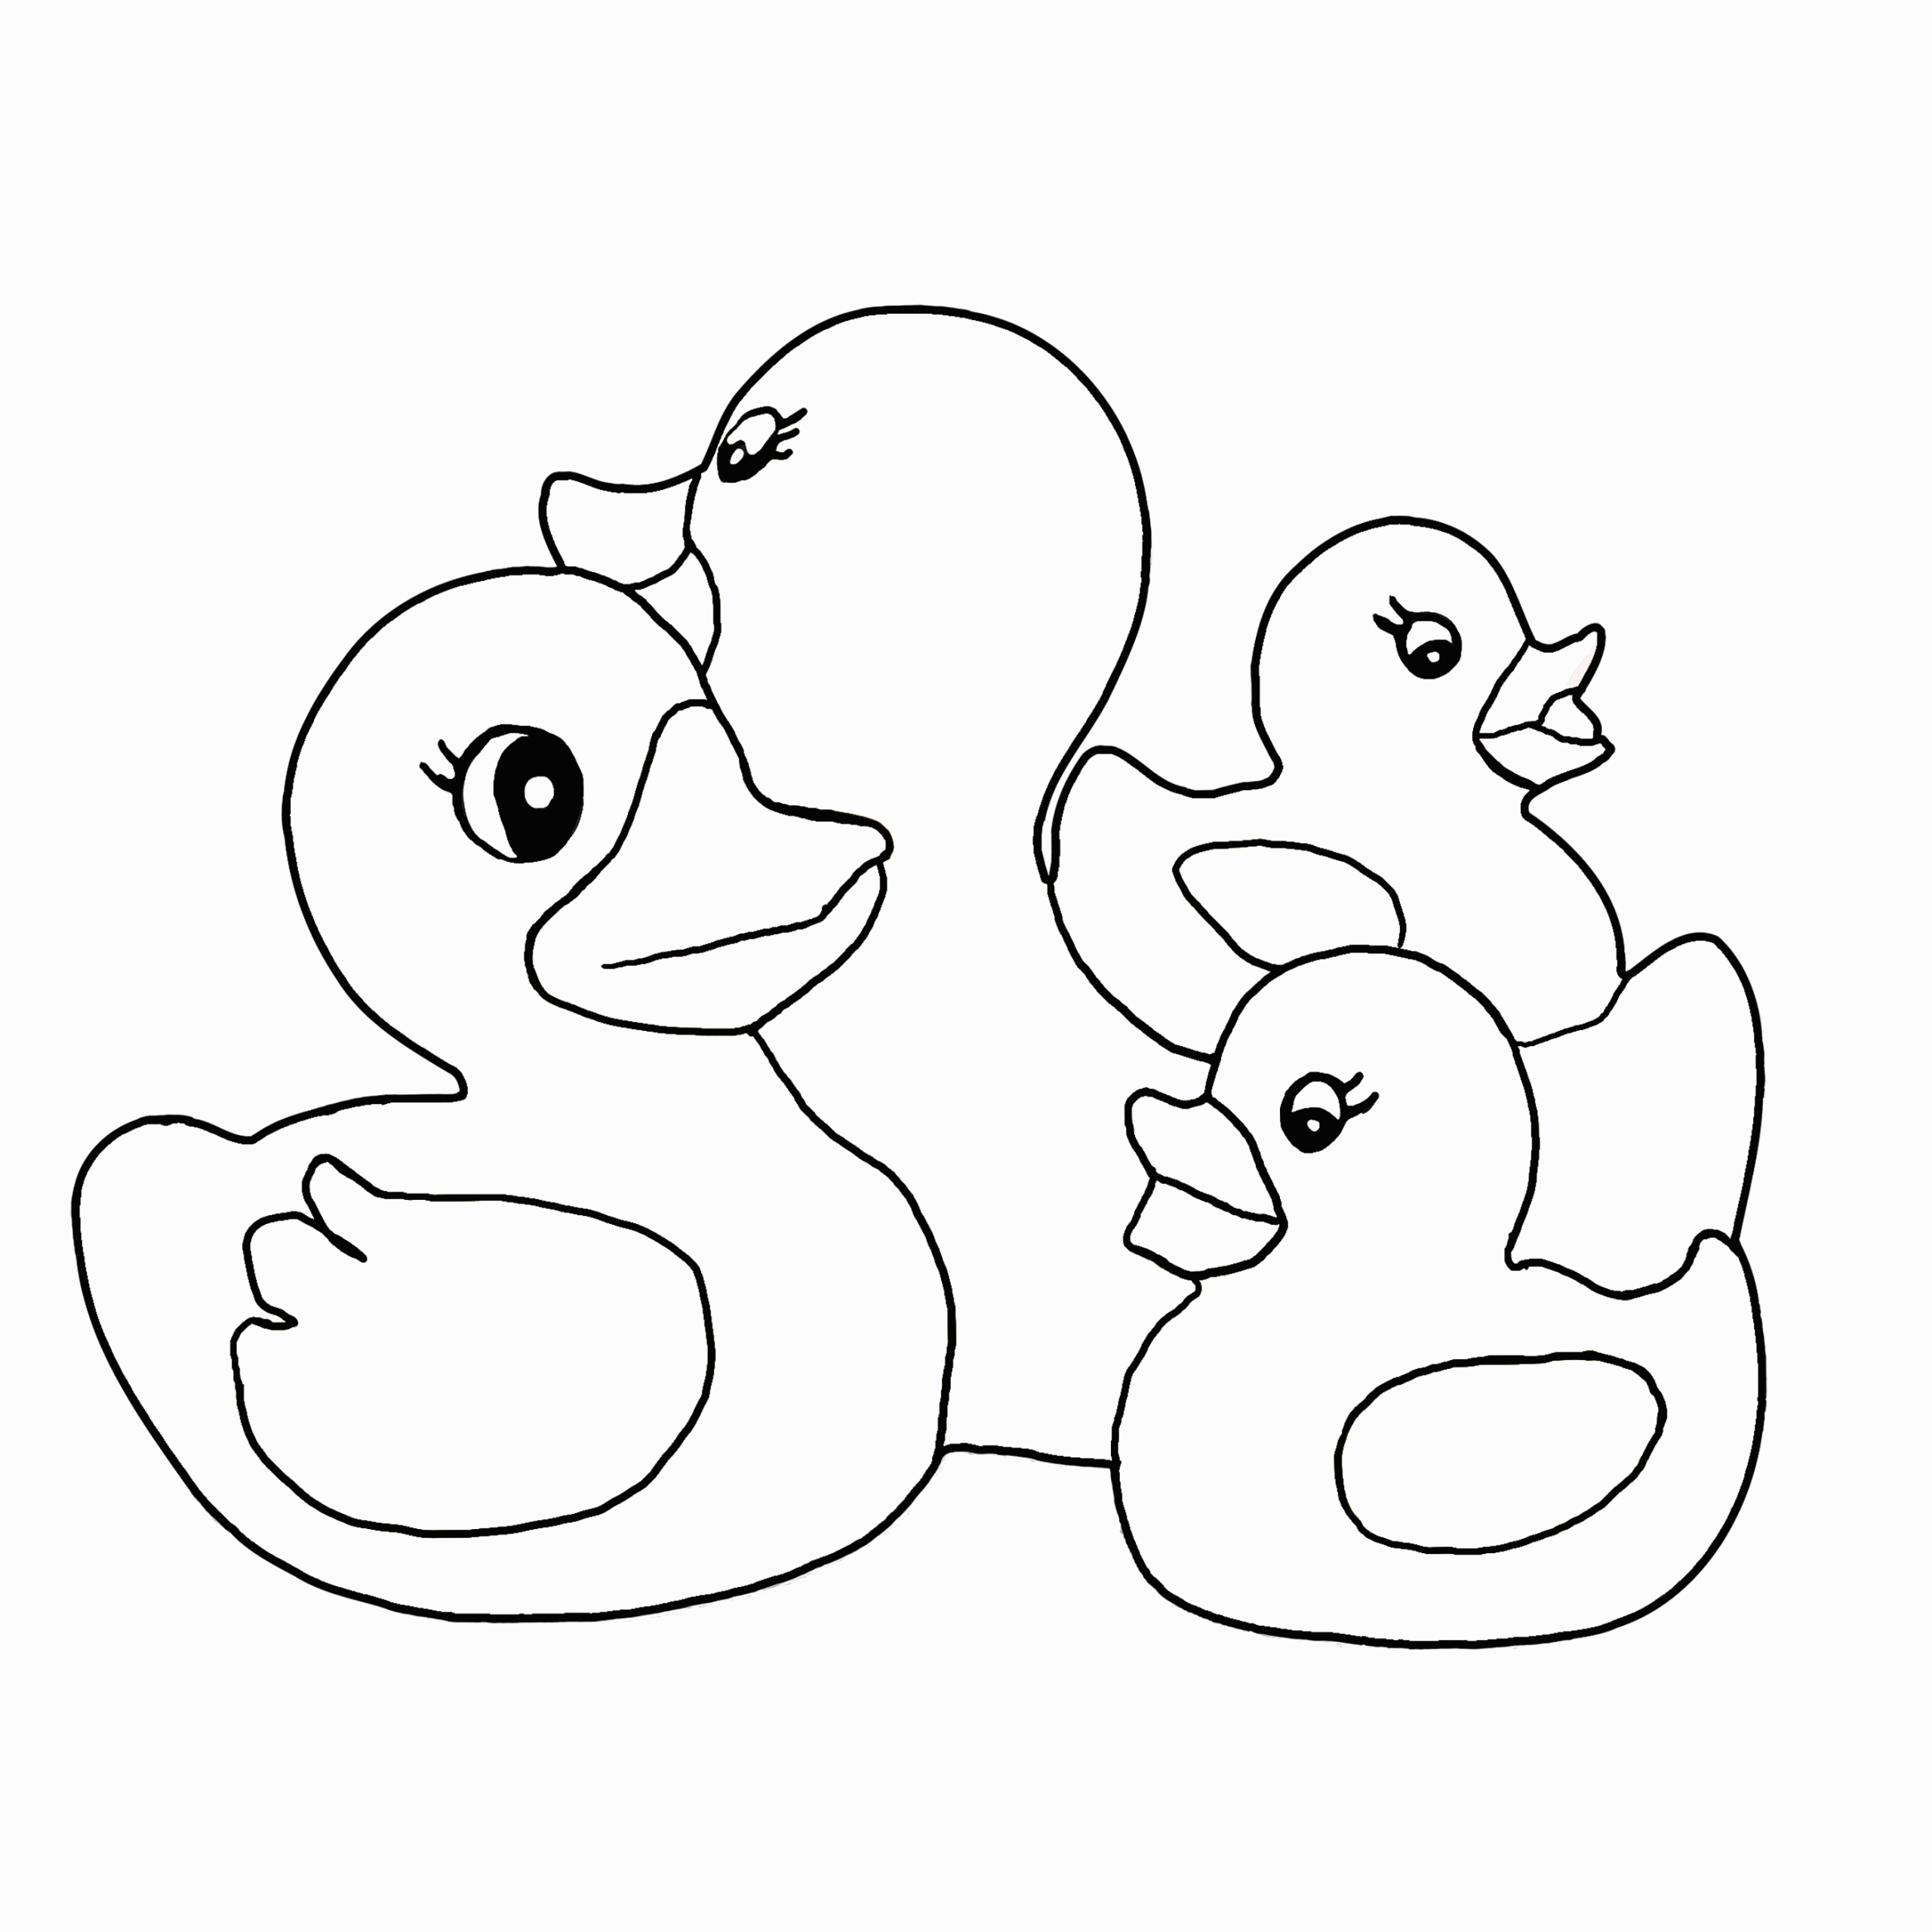 Baby Duck Coloring Page
 Cute Baby Duck Coloring Pages Coloring Home